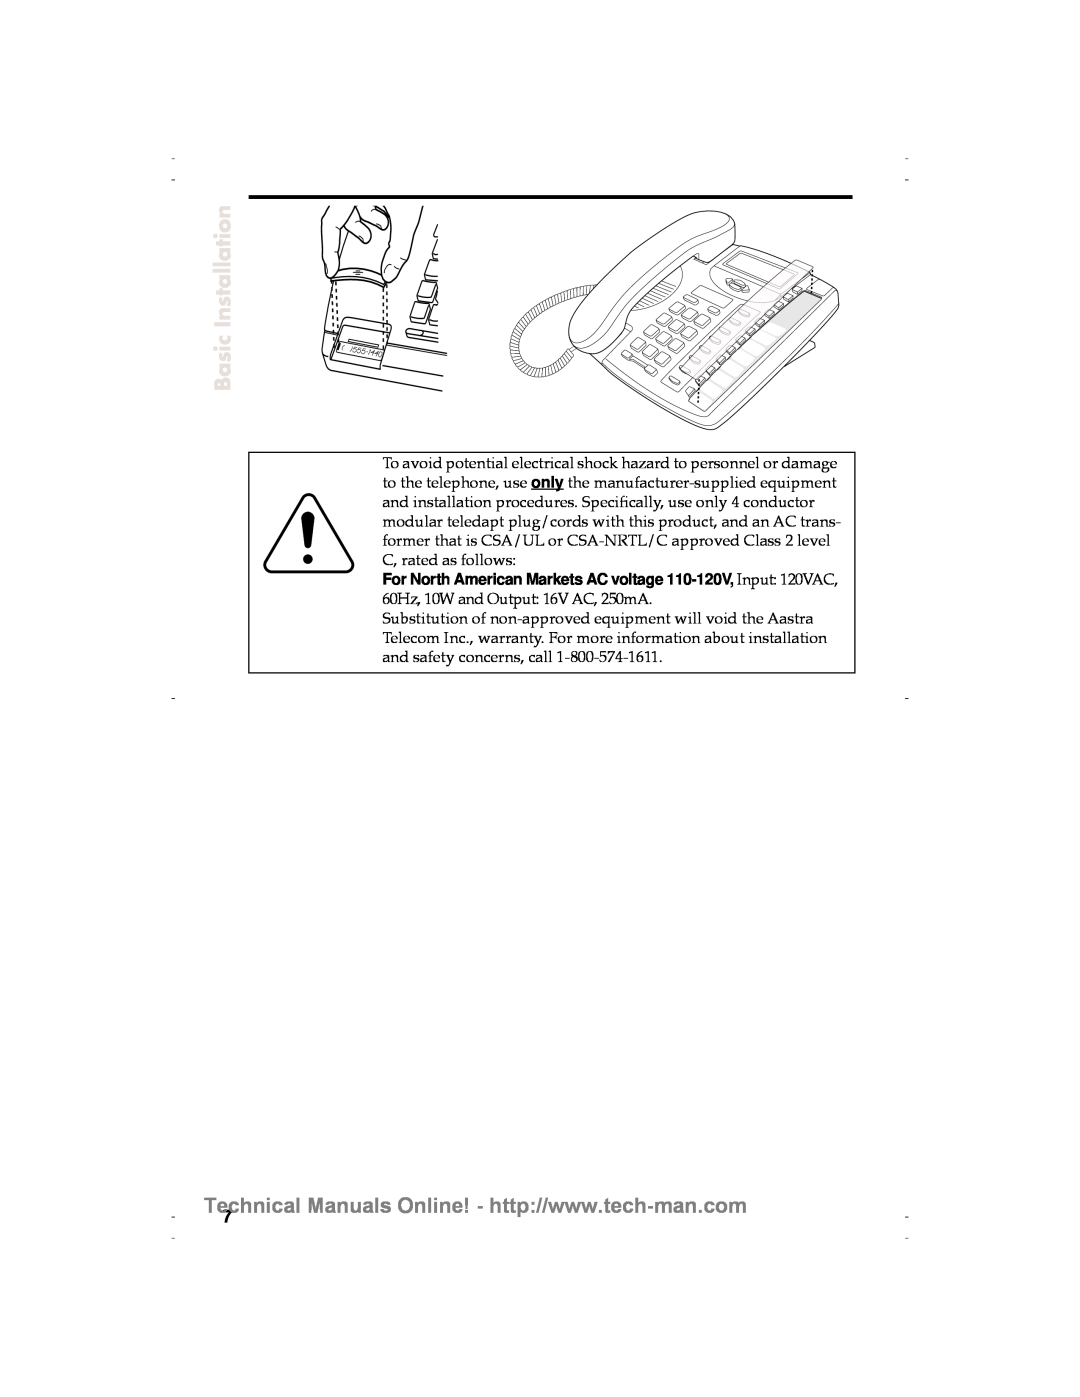 Aastra Telecom 9120 technical manual Basic Installation, For North American Markets AC voltage 110-120V, Input 120VAC 